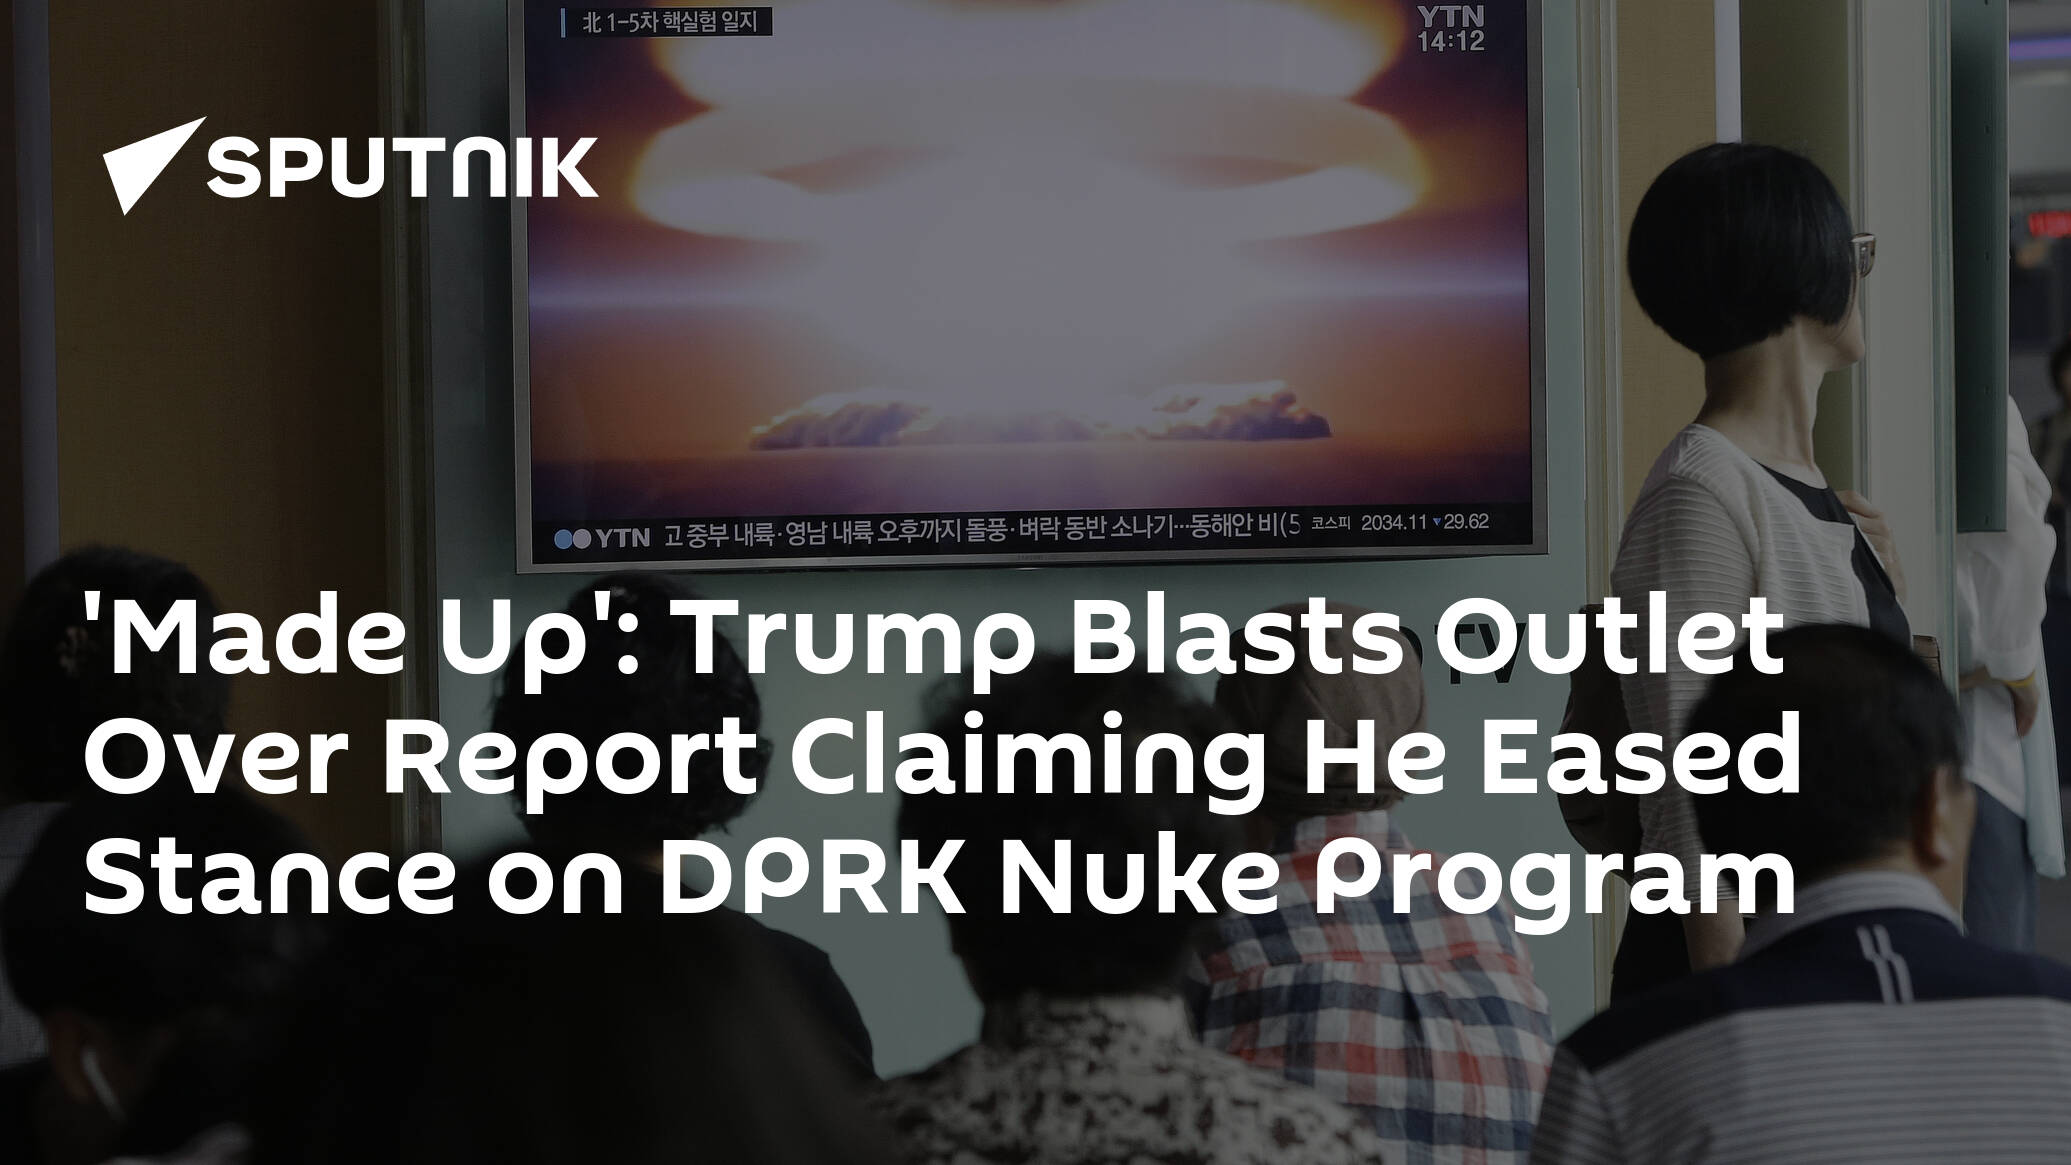 'Made Up': Trump Blasts Outlet Over Report Claiming He Eased Stance on DPRK Nuke Program